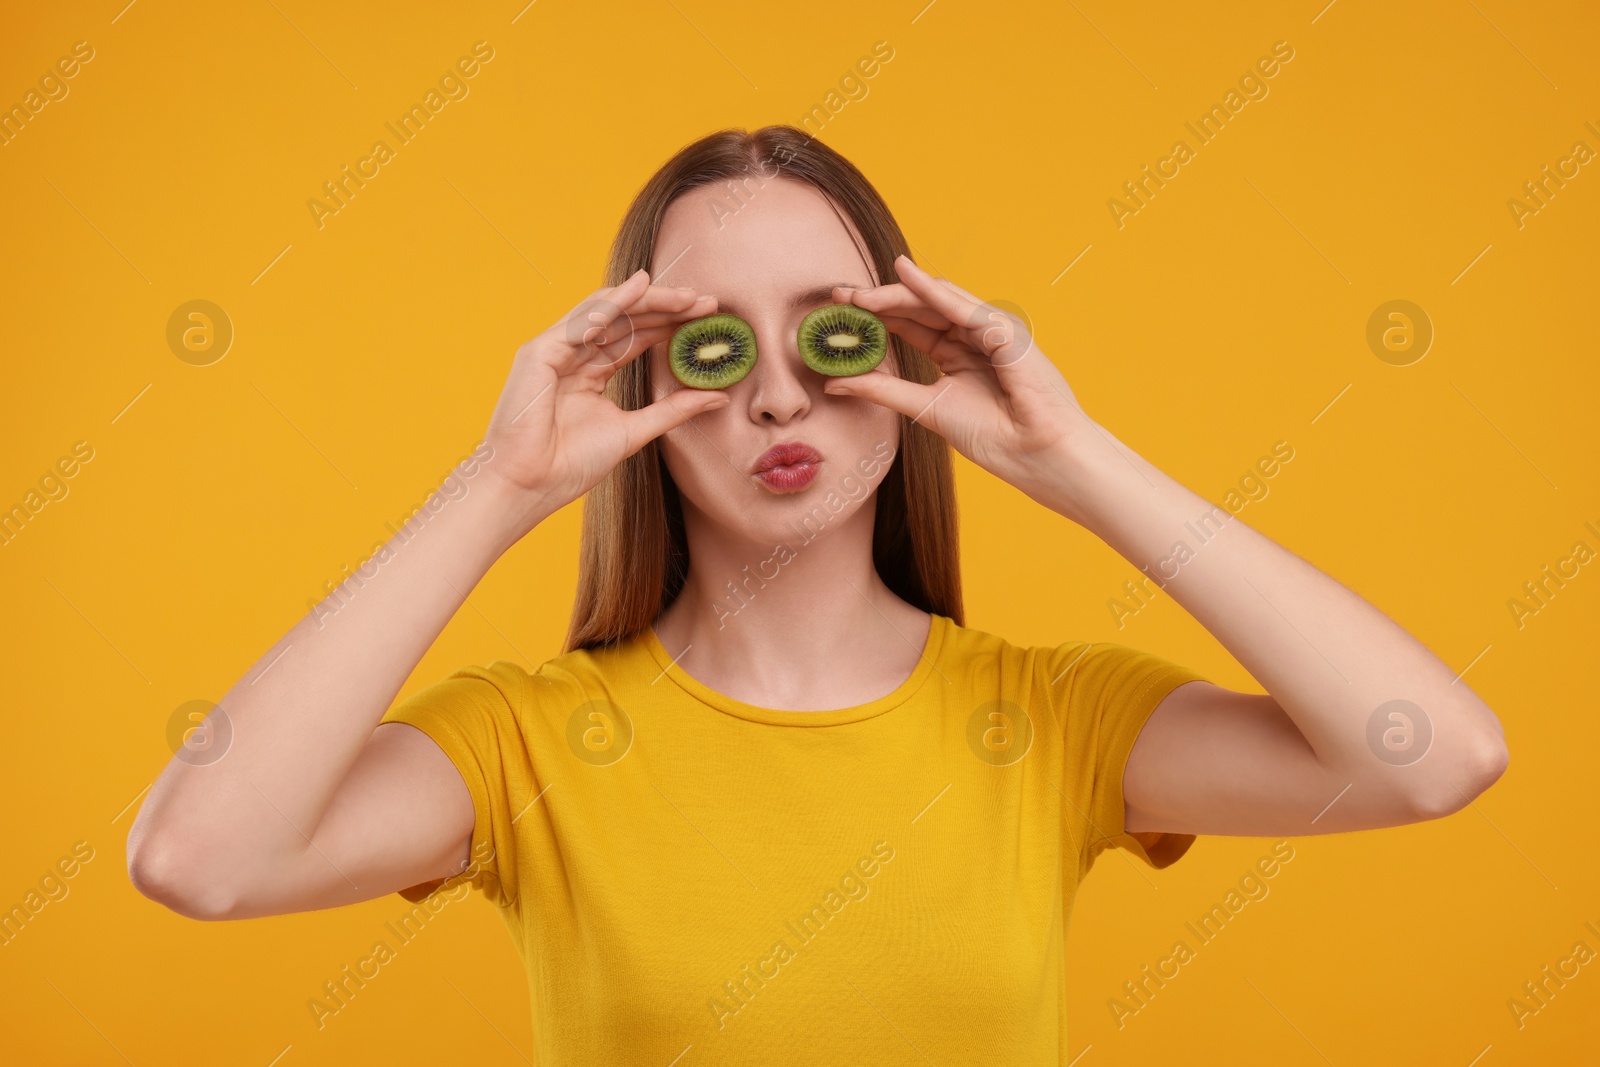 Photo of Young woman holding halves of kiwi near her eyes on yellow background